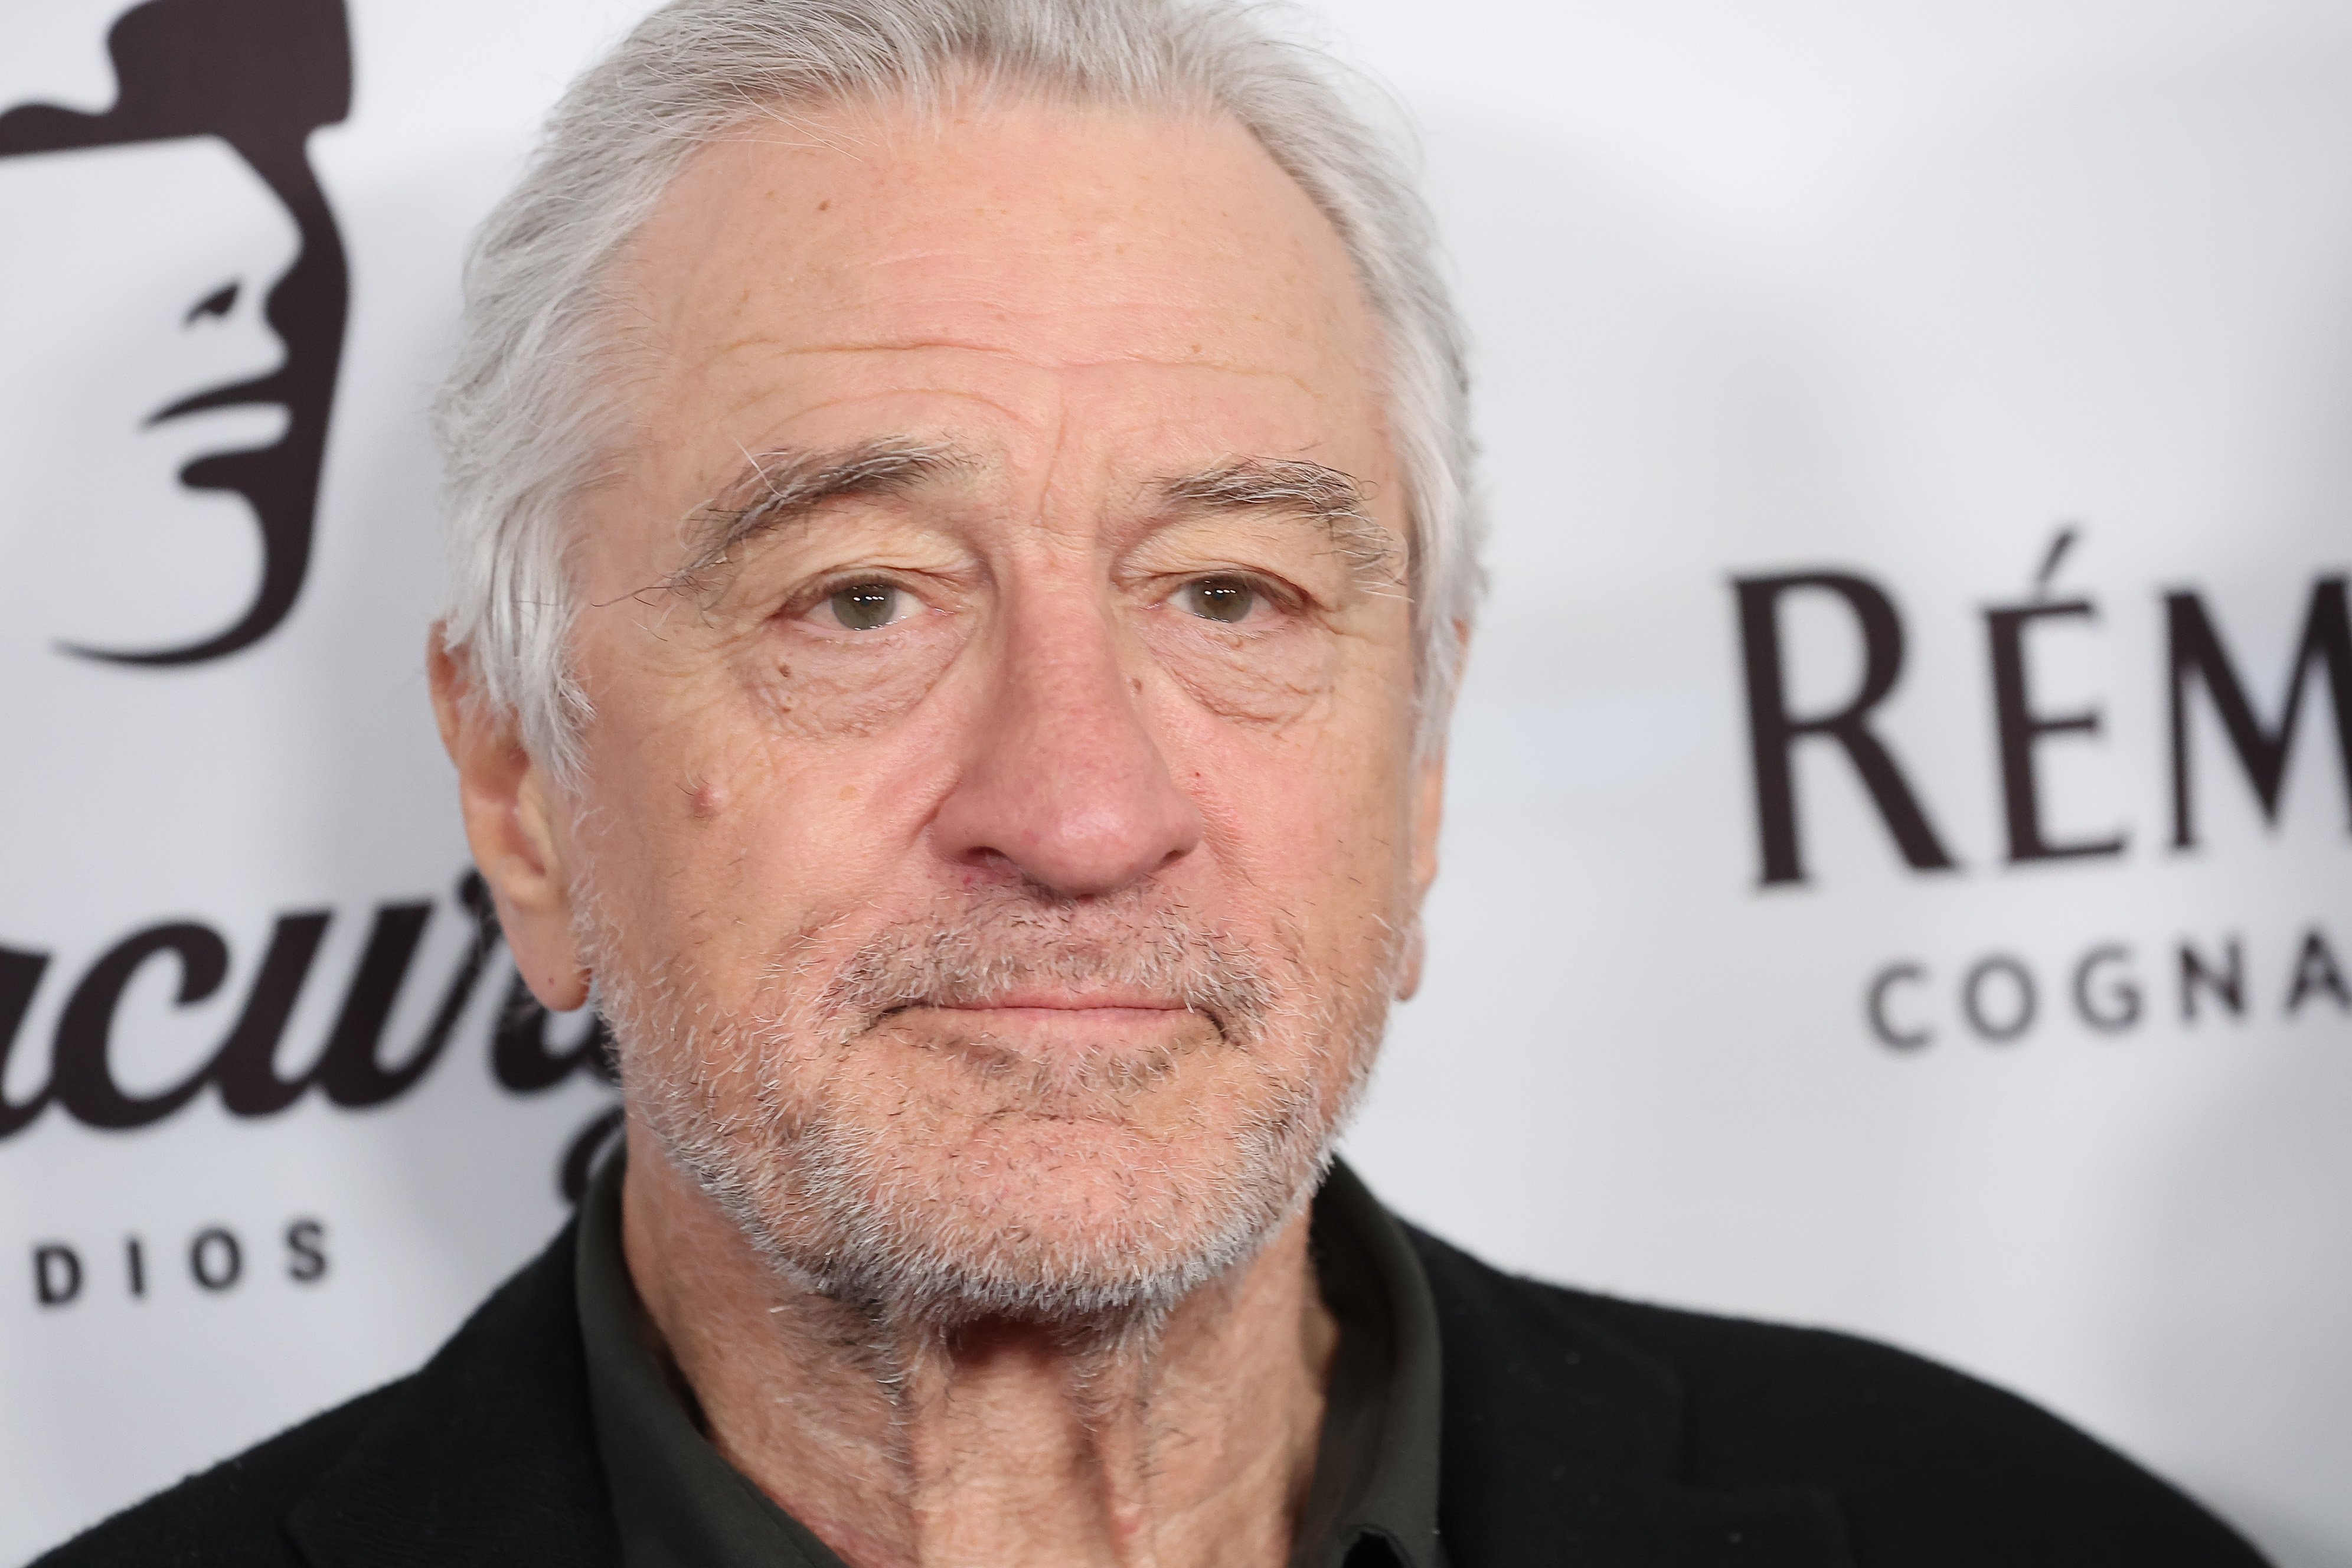 Robert De Niro at the world premiere of "Mixtape" on April 7, 2022 | Source: Getty Images